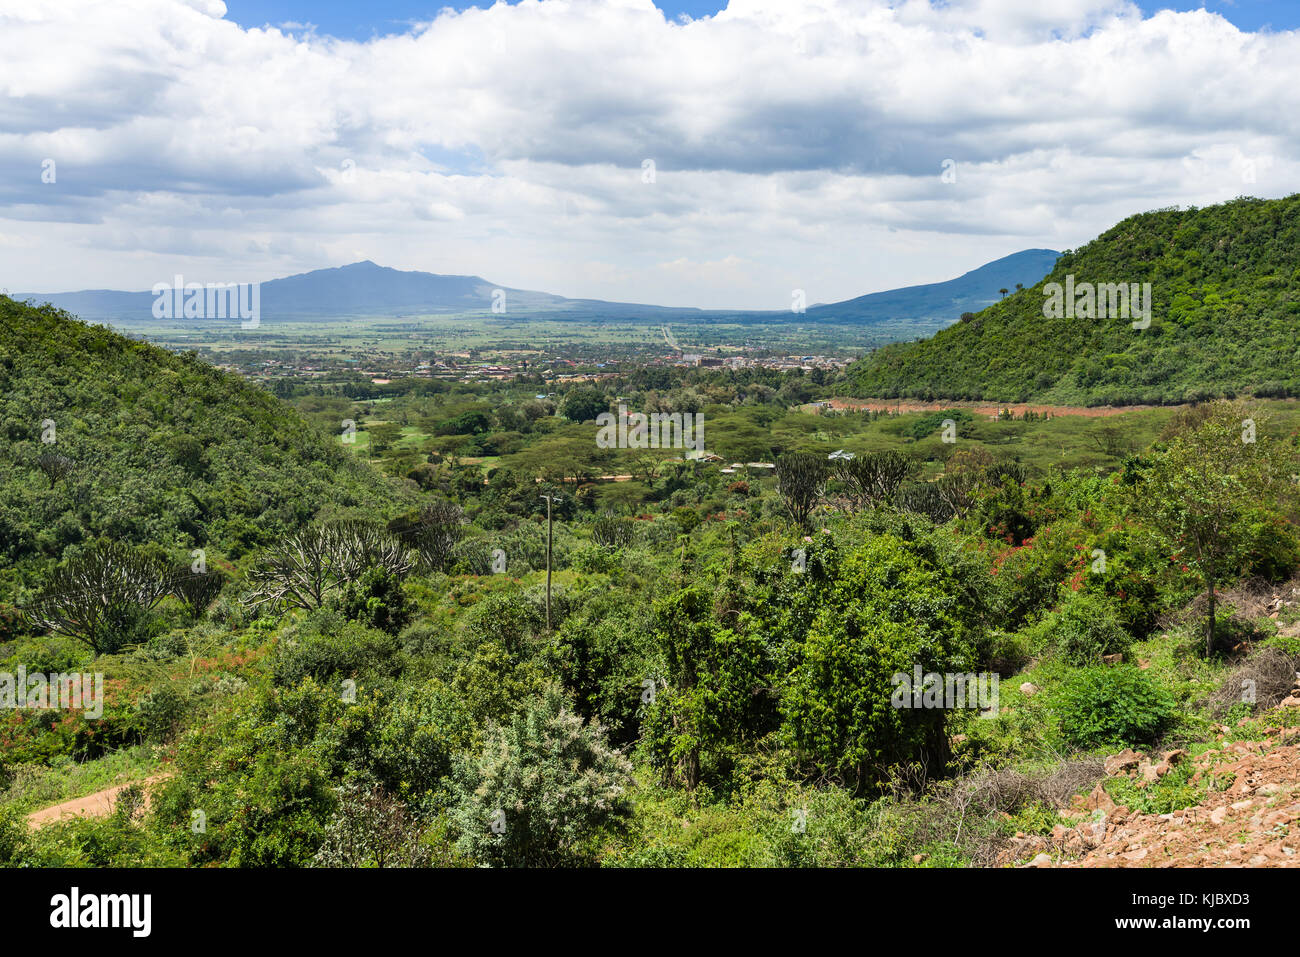 View of the Rift Valley from elevated position with hills and mountains in background, Kenya, East Africa Stock Photo